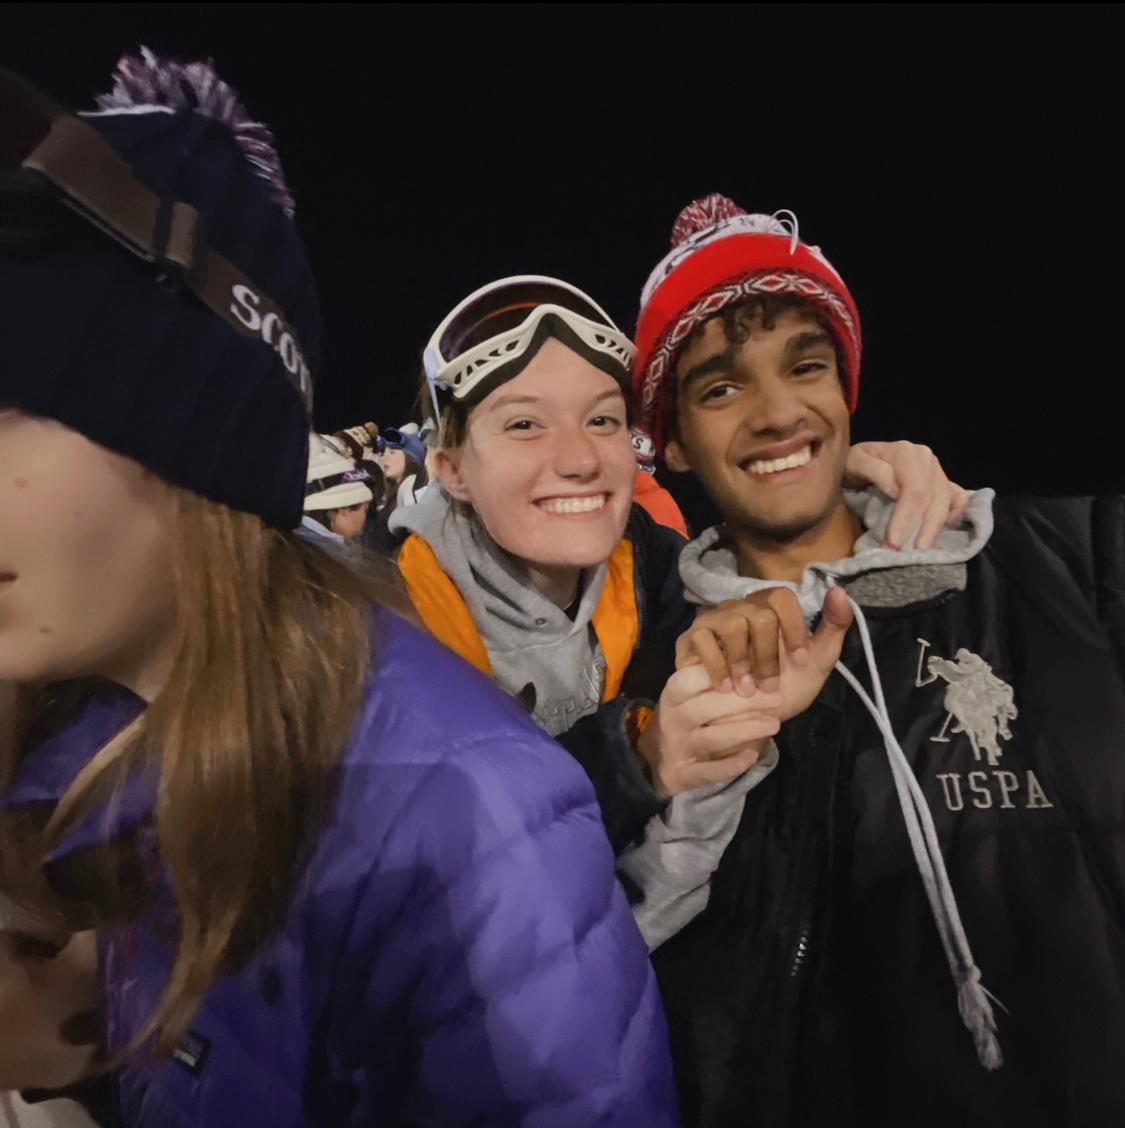 Seniors, Kate Lee and Miles CianiSmith enjoying the game in their ski gear.